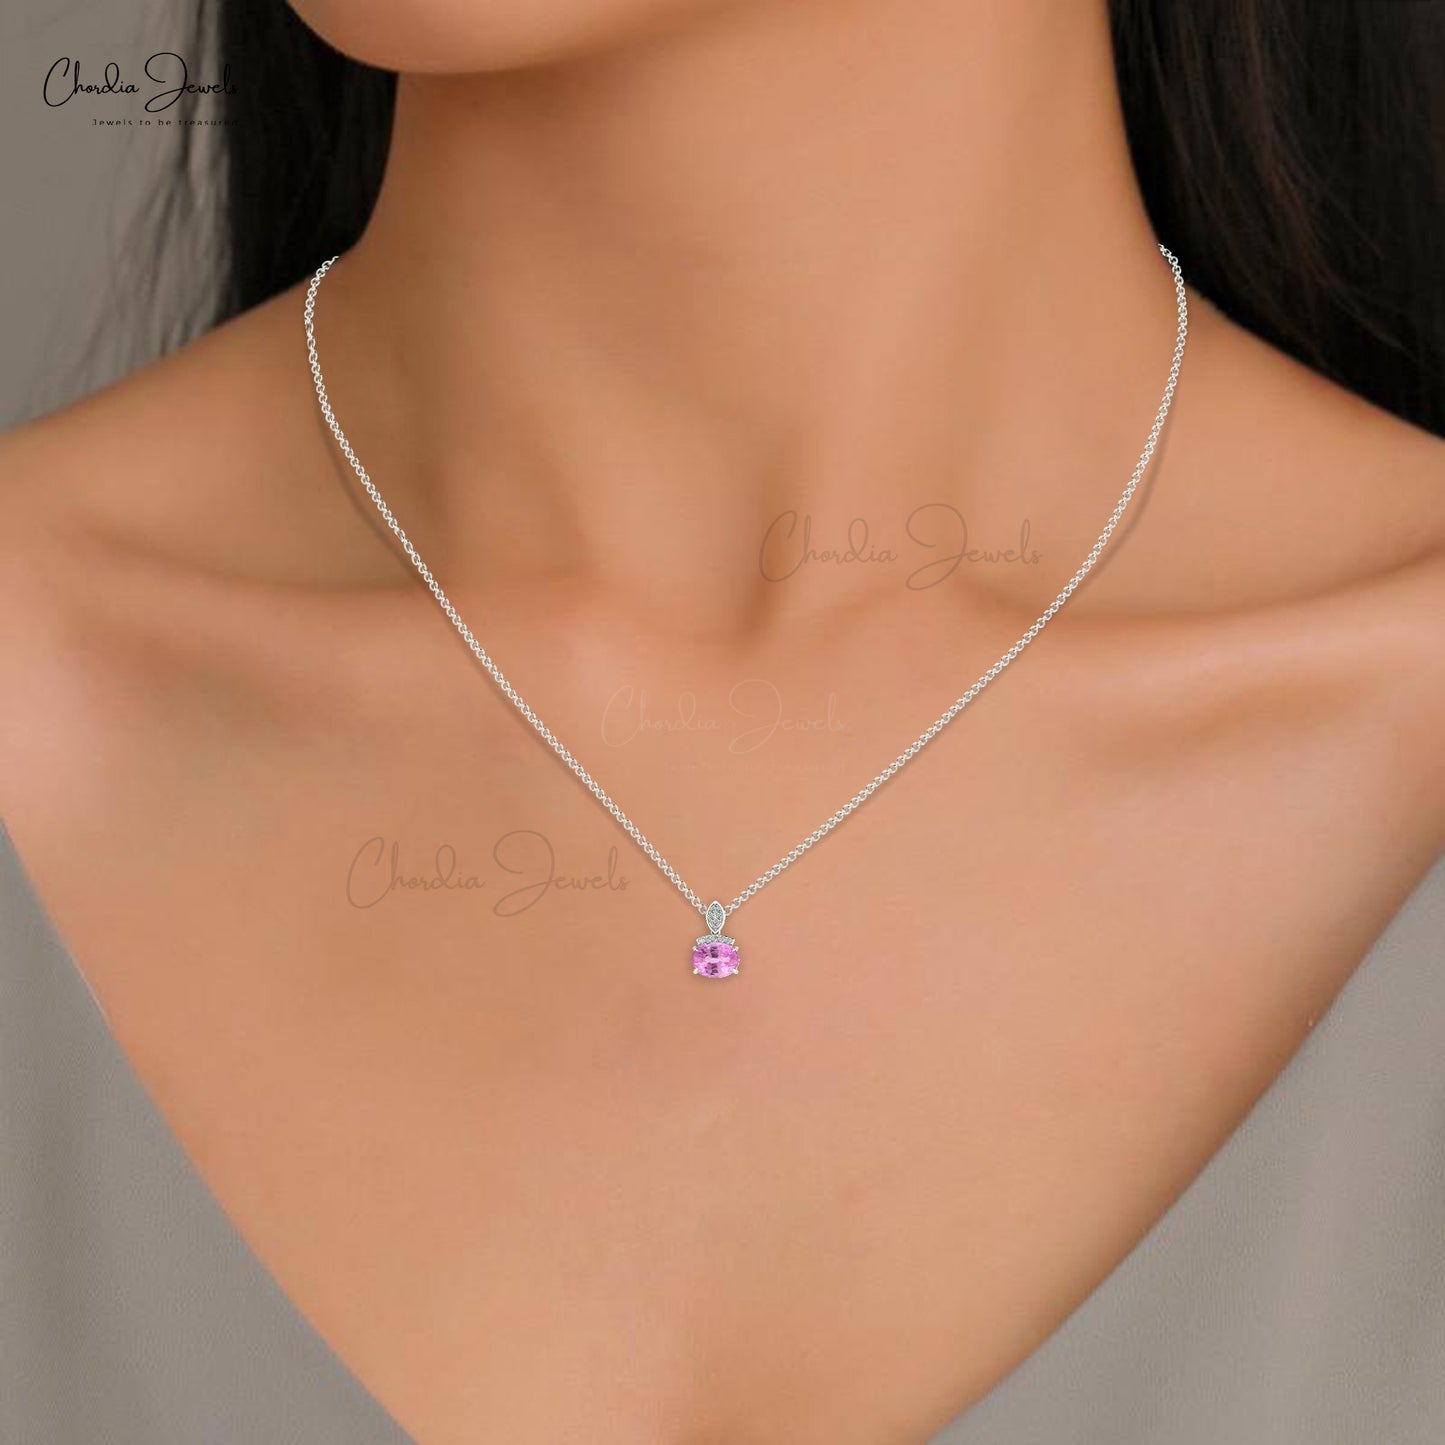 Load image into Gallery viewer, Dainty Pendant With Pink Sapphire &amp;amp; Diamond Accents Real 14k Gold Handcrafted Pendant
